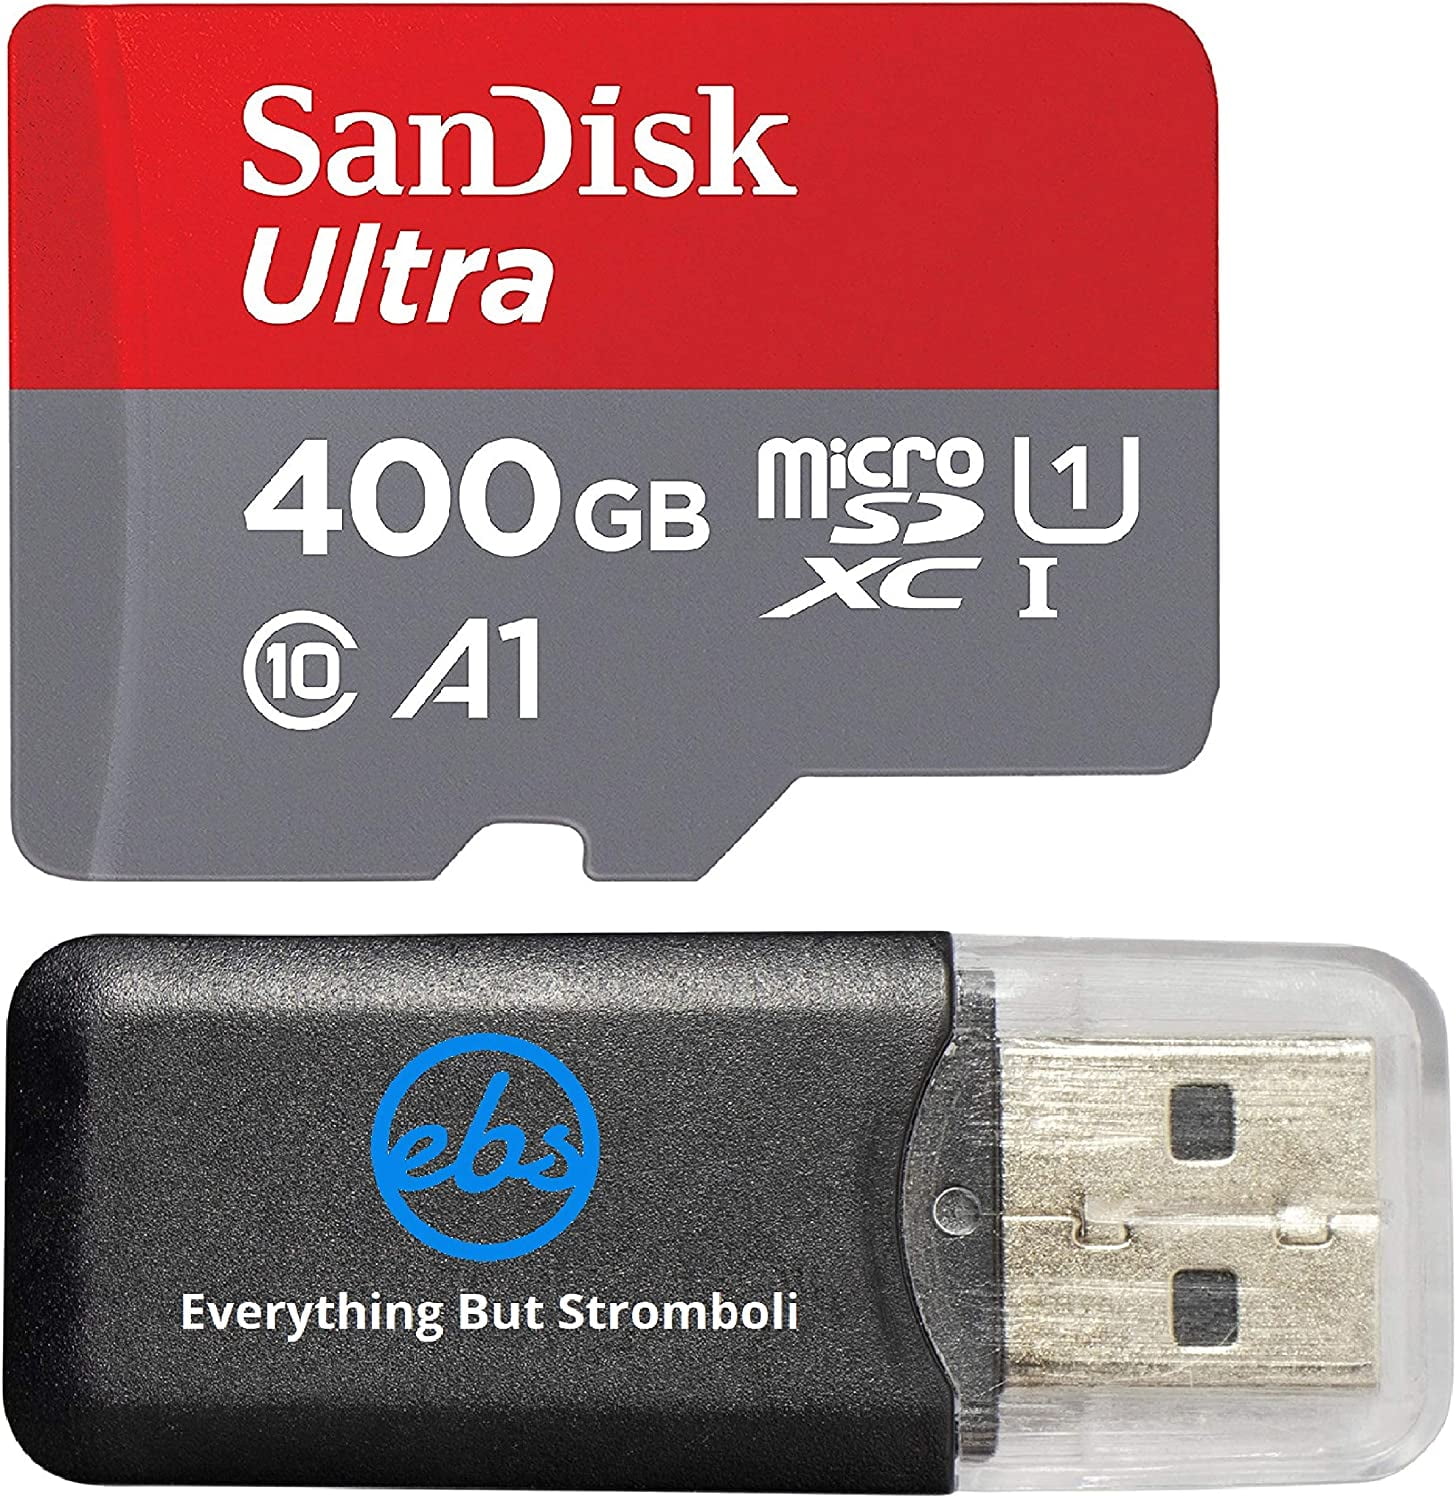 Samsung Galaxy S9 Memory Card SanDisk 400GB Ultra Micro SD SDXC UHS-I Class 10 for S9+, S9 Plus ...